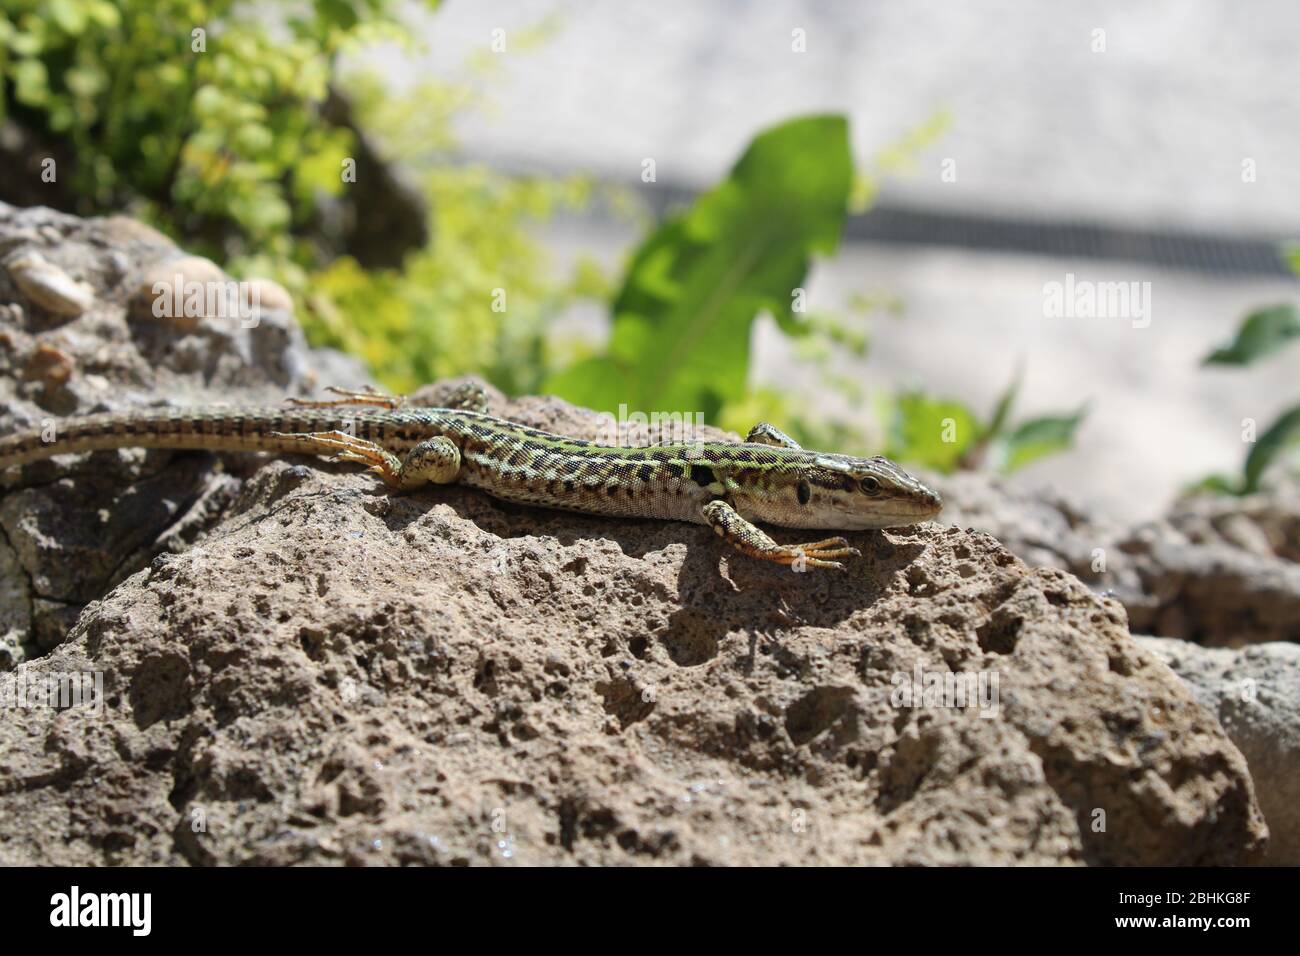 Lizard on volcanic rock, raising its feet to acknowledge the presence of a dominant being (the photographer) Stock Photo